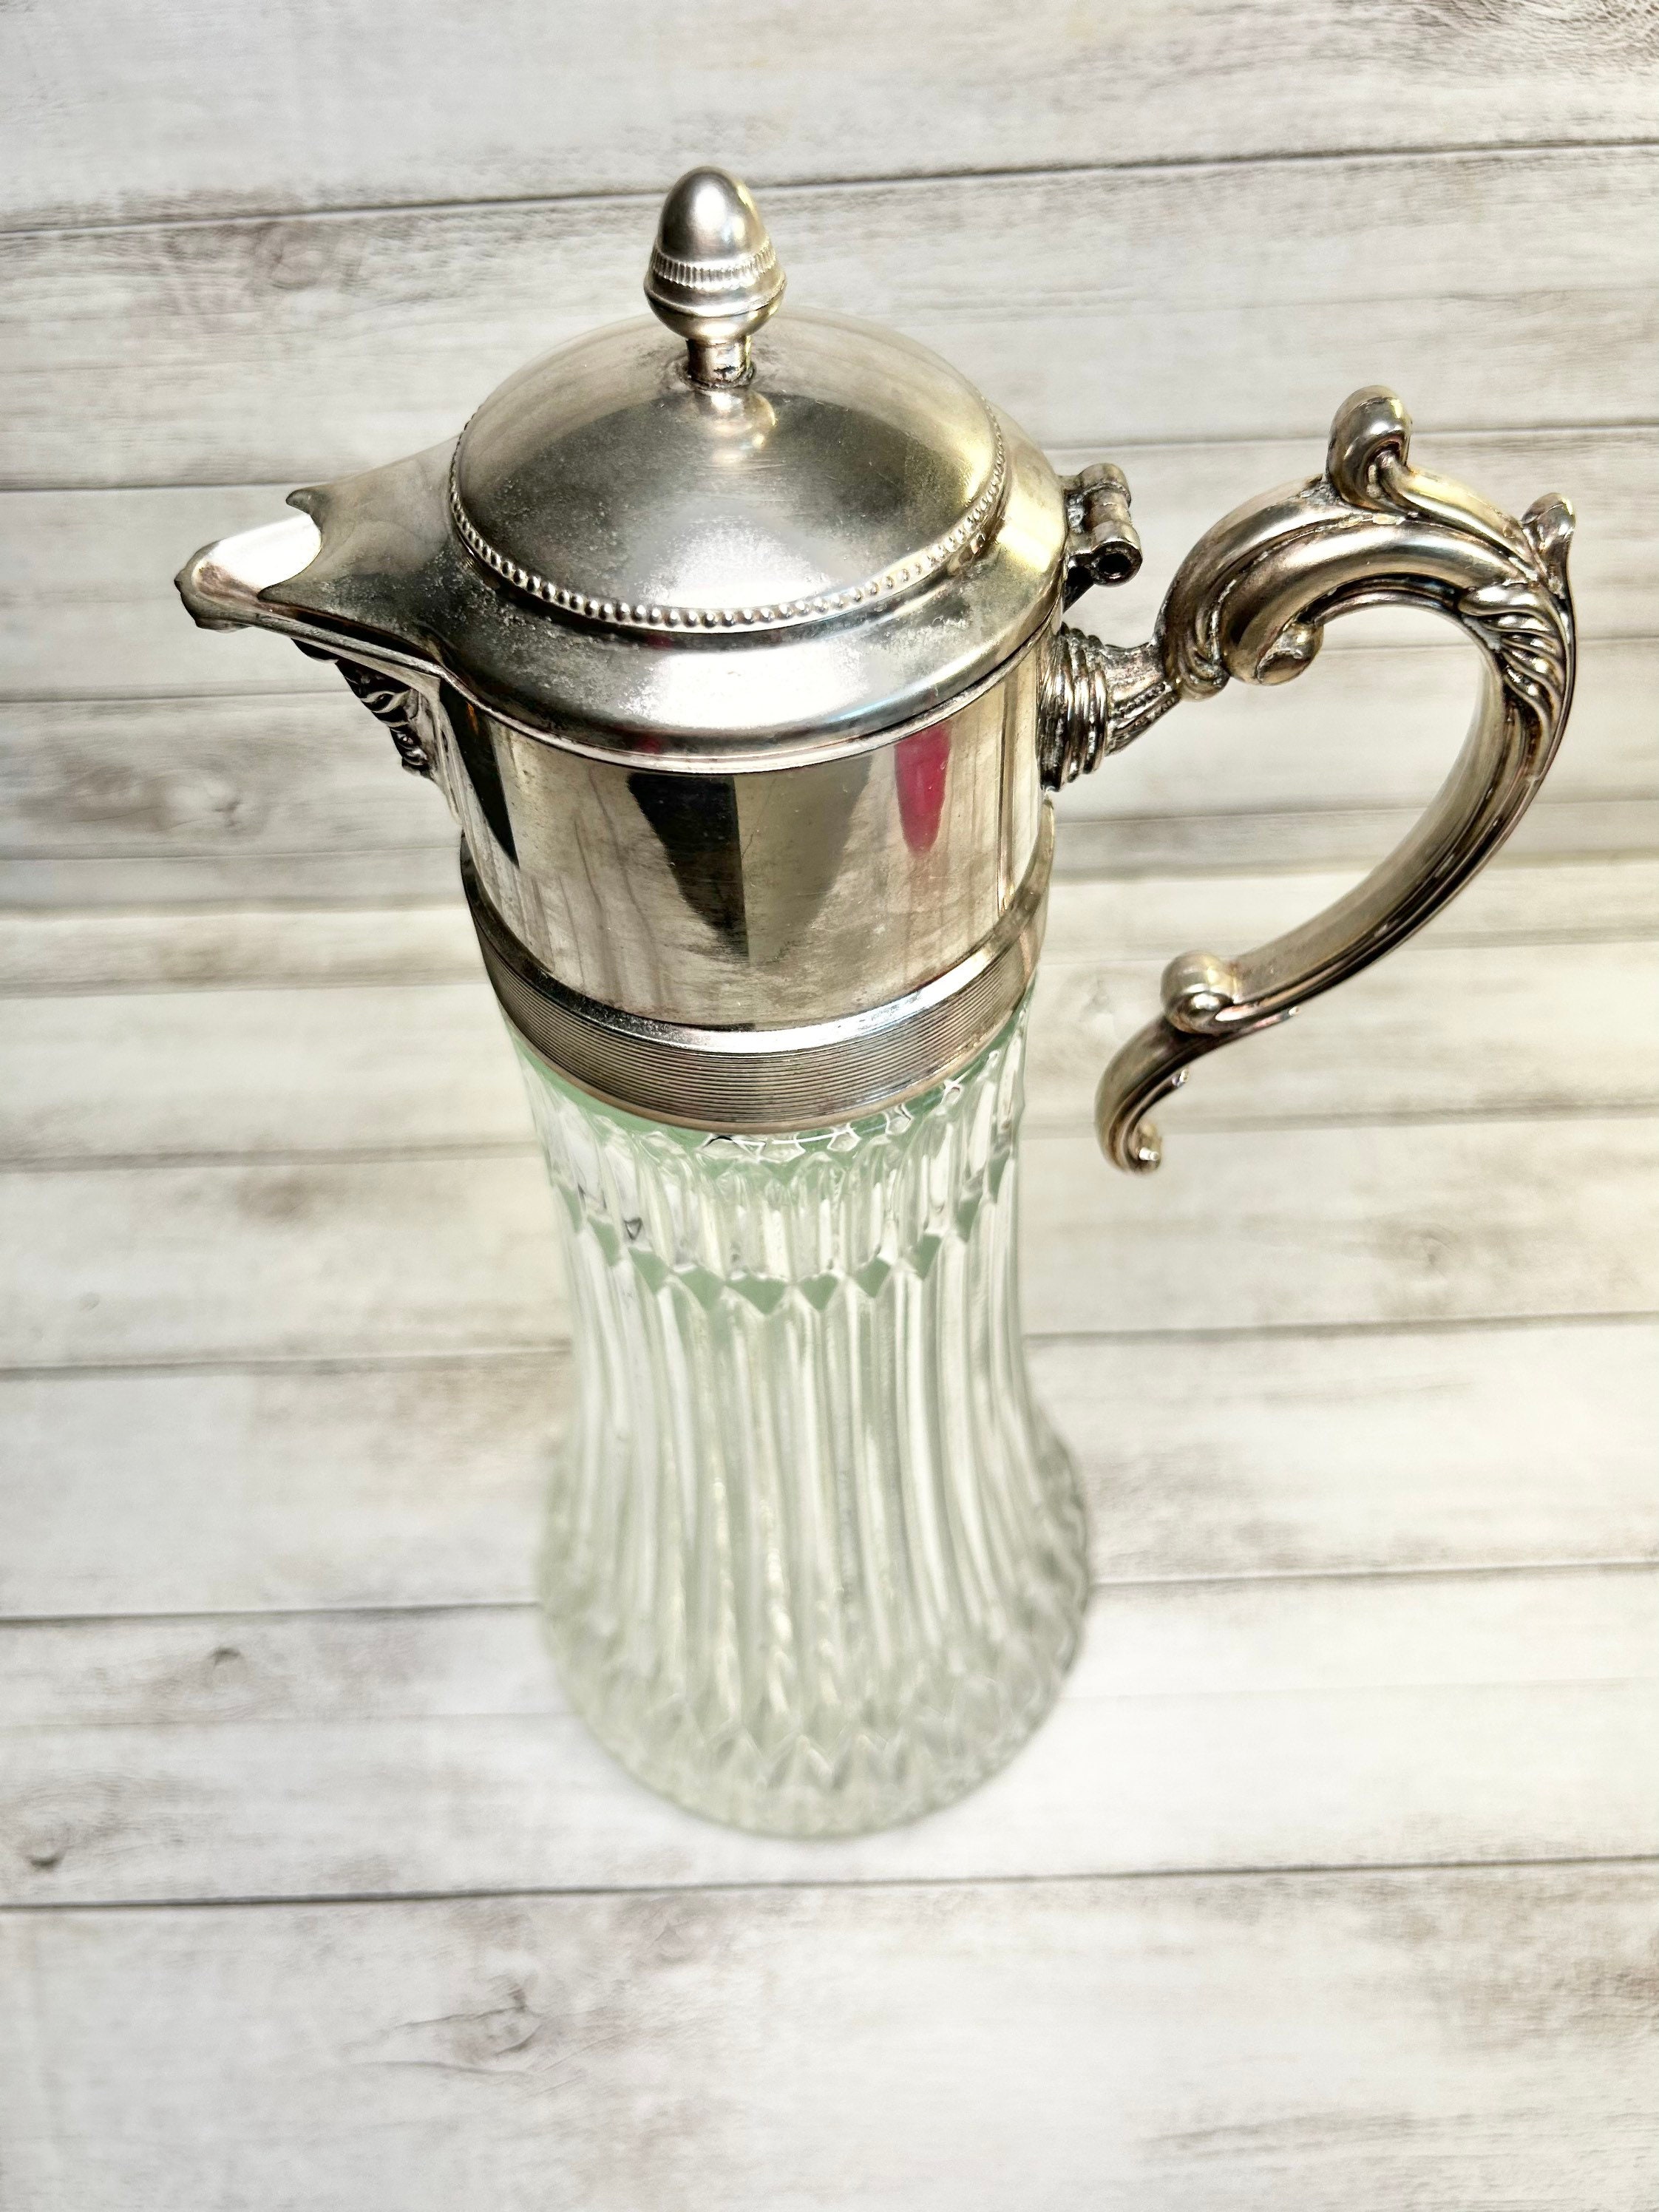 Vintage Meridional Silver Plated Pitcher Thermal Carafe Made In Brazil